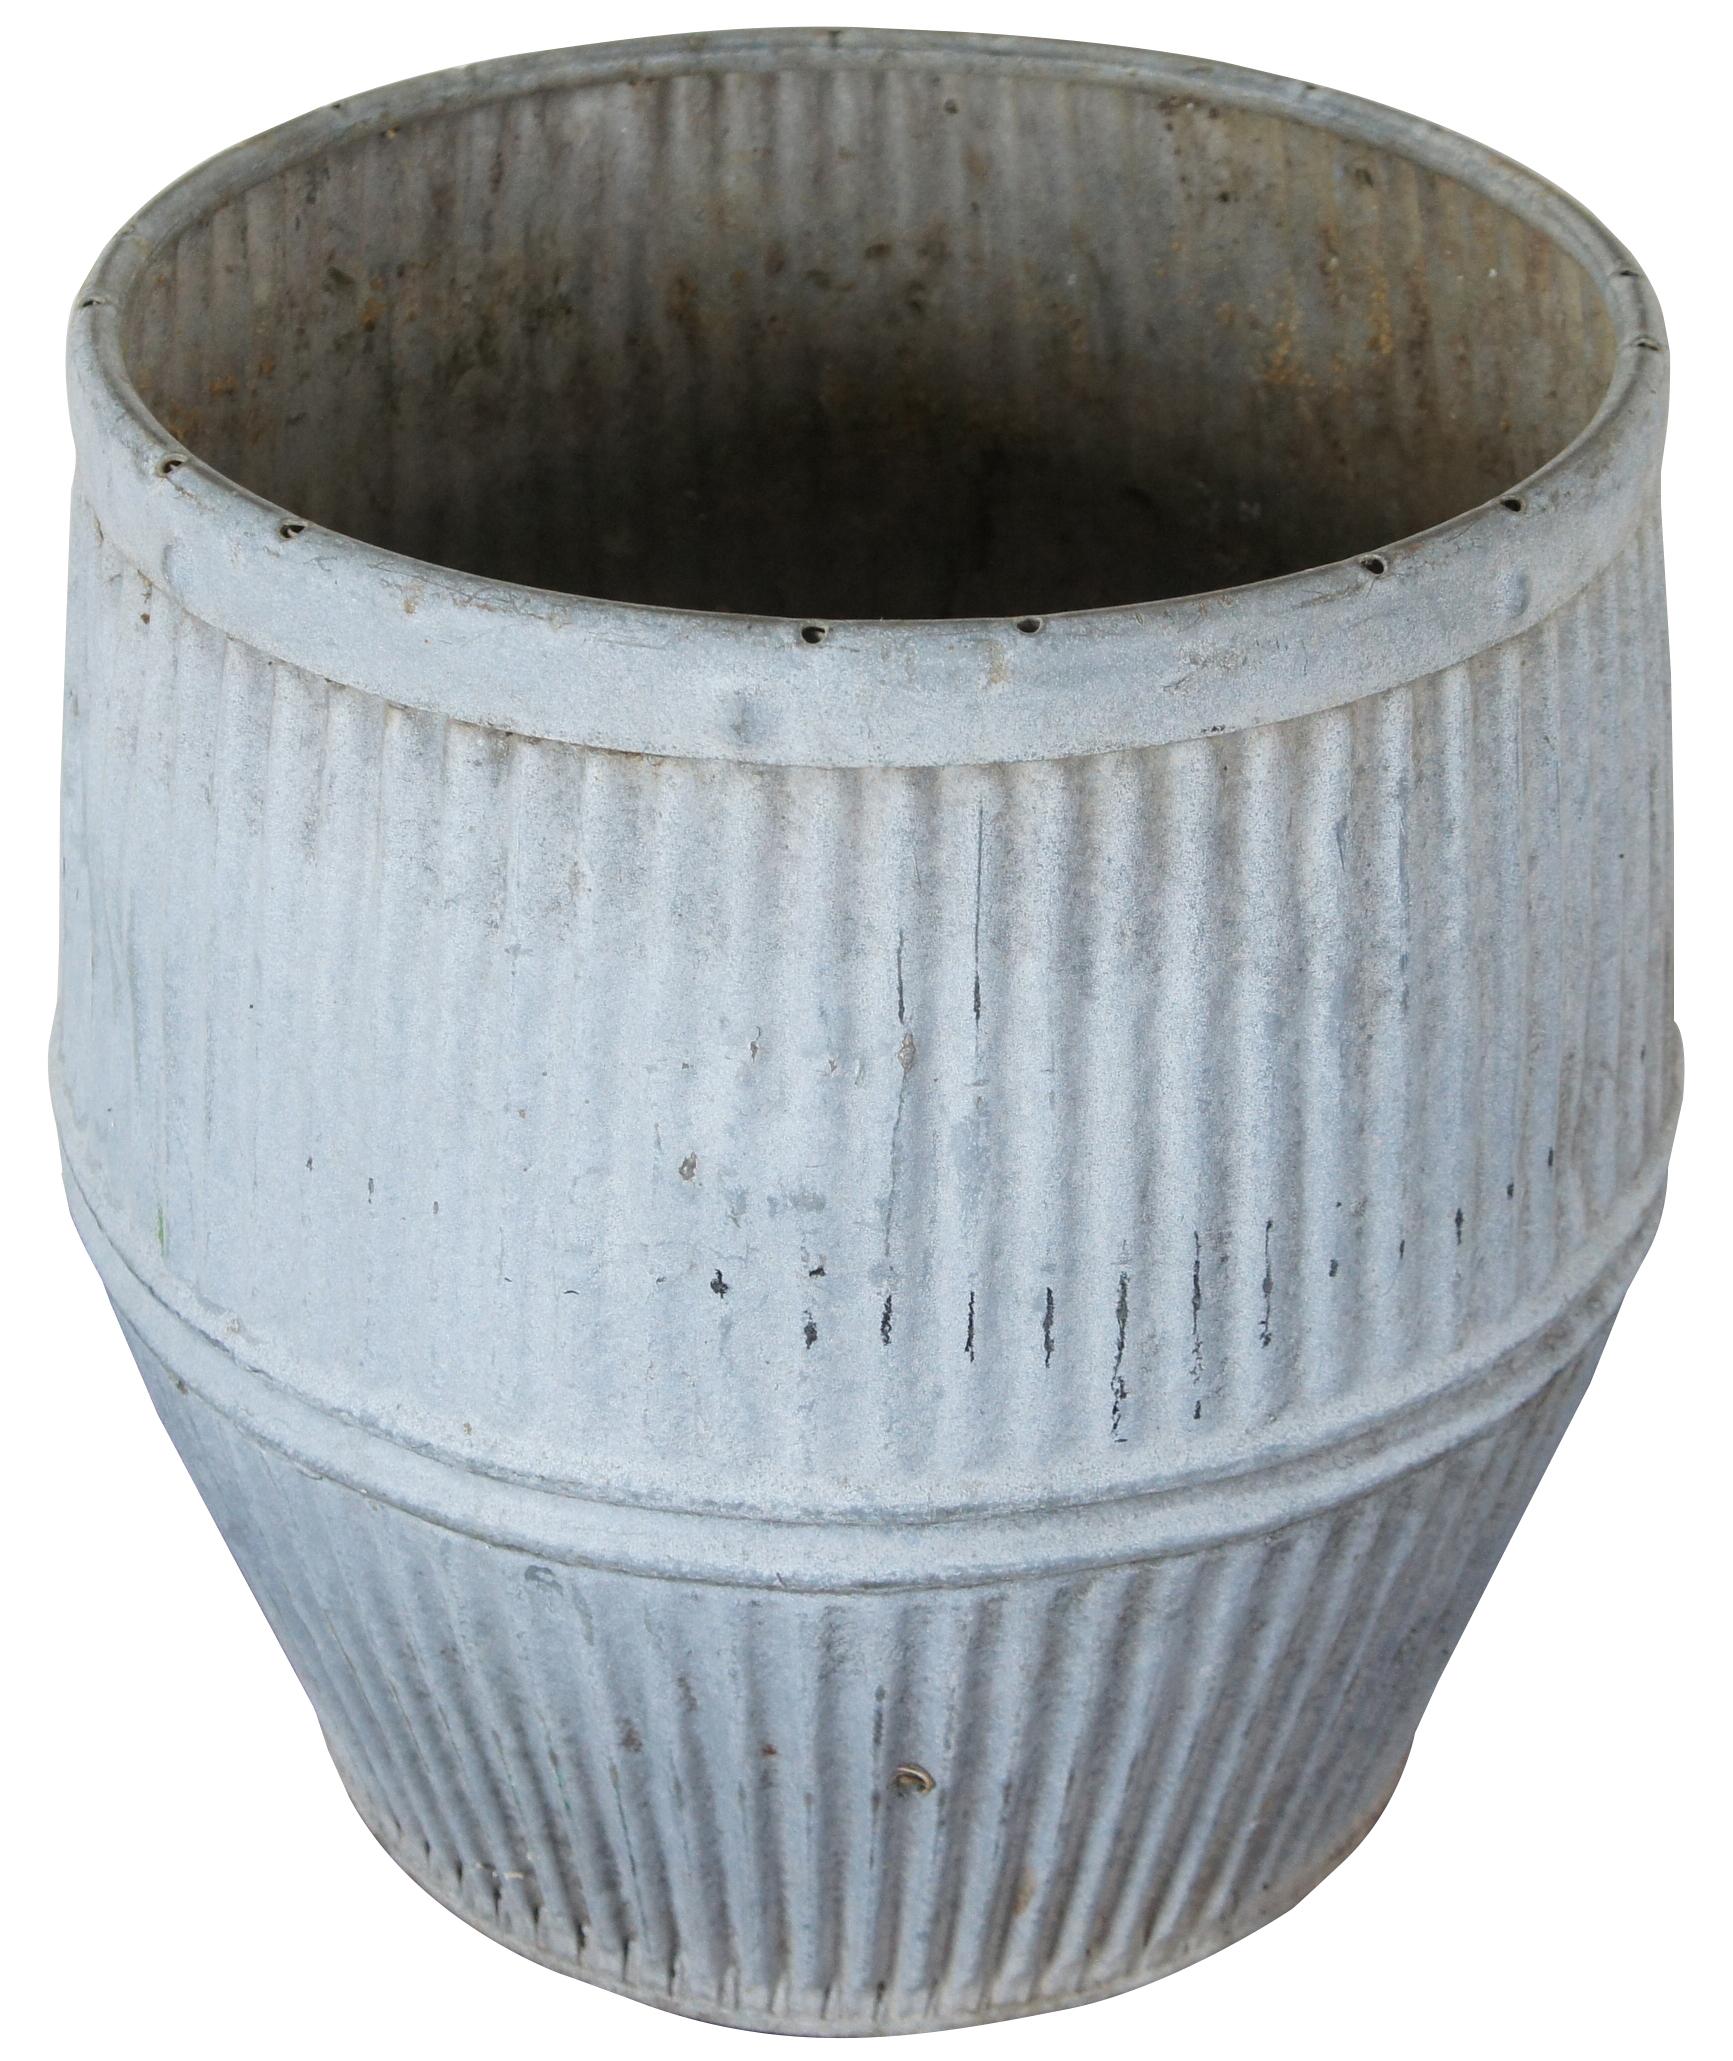 Vintage galvanized zinc wash barrel with tapered ends, corrugated sides and a groove around the middle.
  